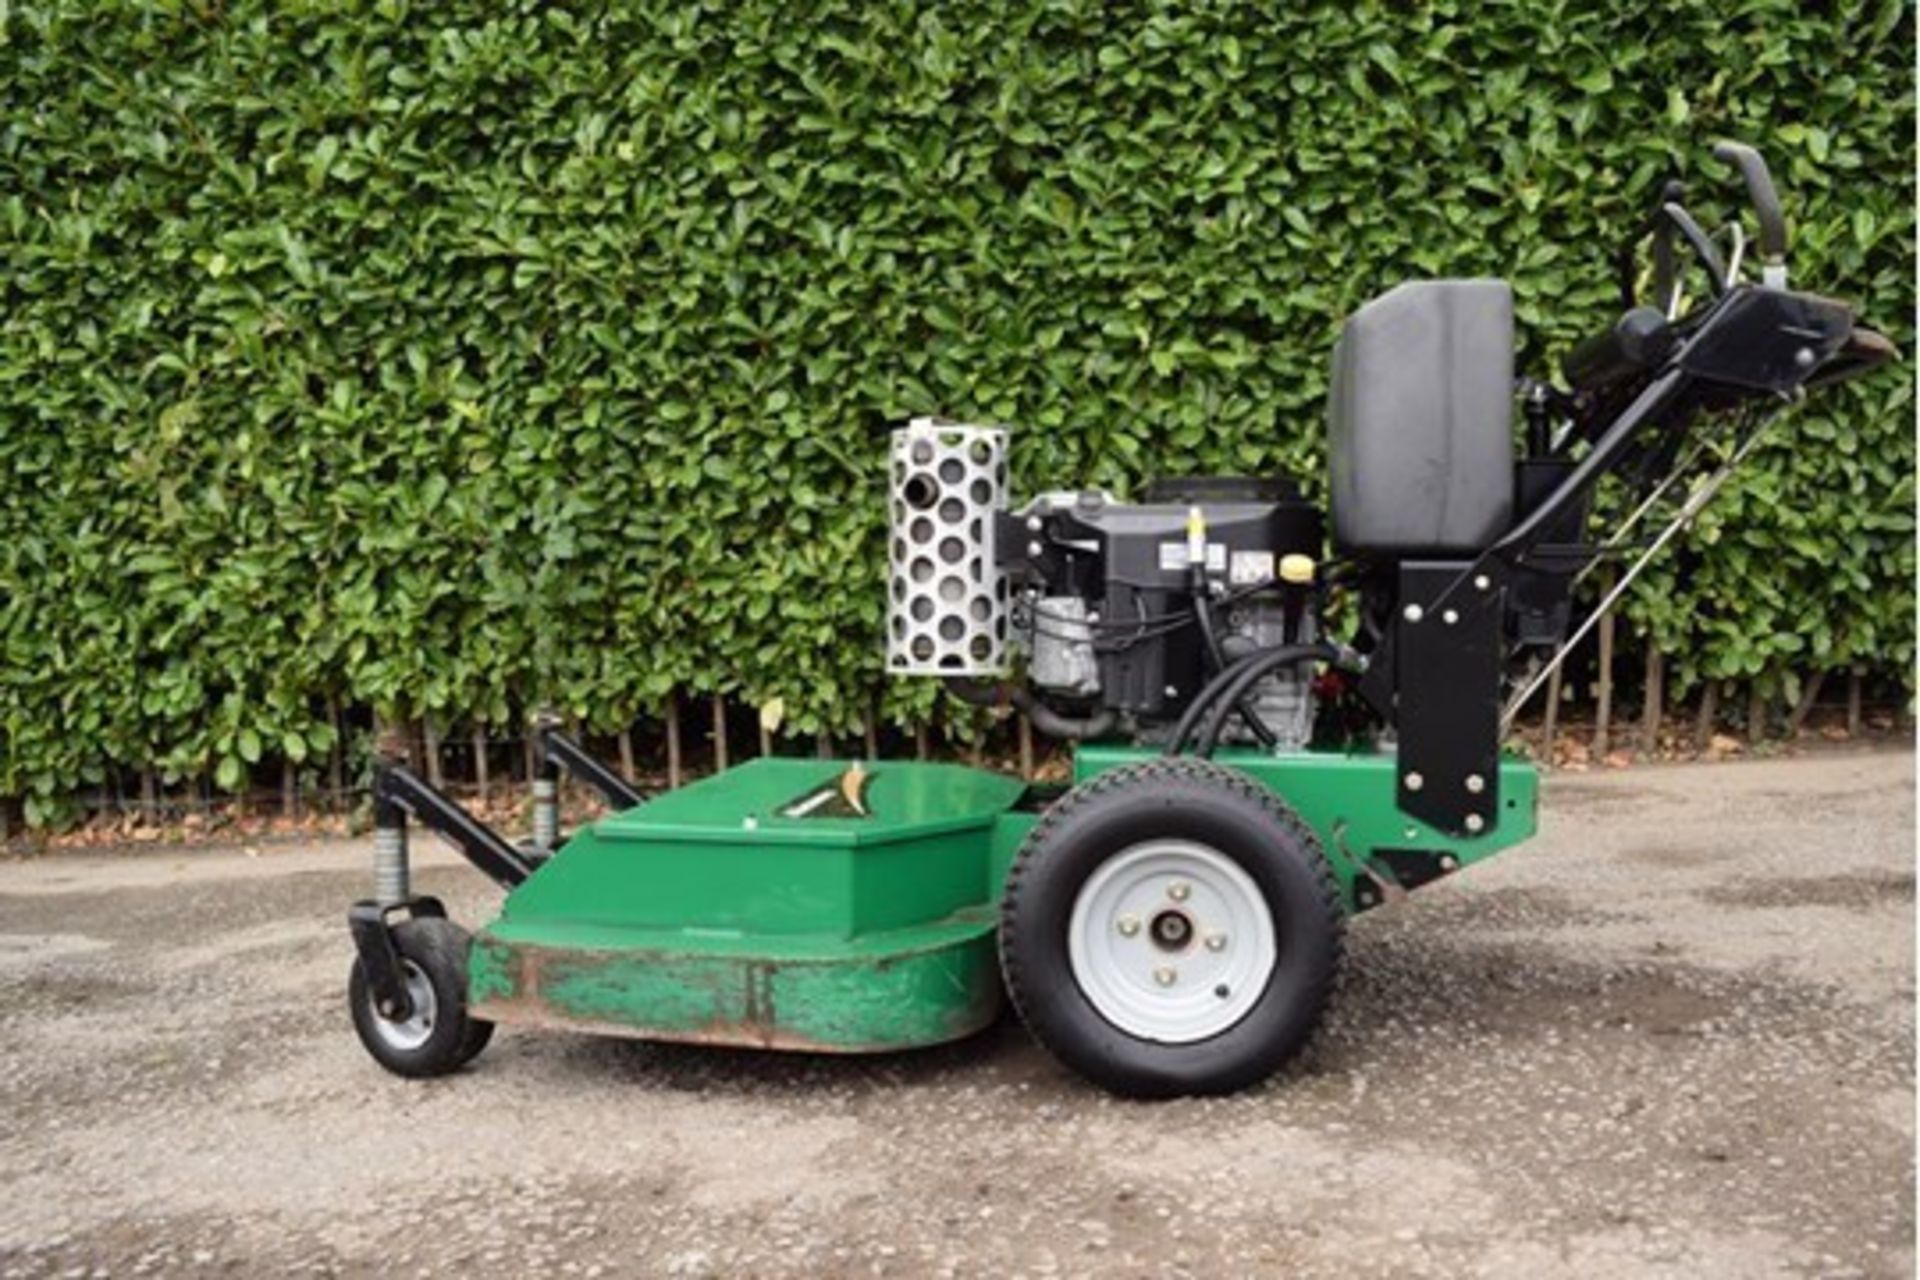 2011 Ransomes Pedestrian 36" Commercial Mower